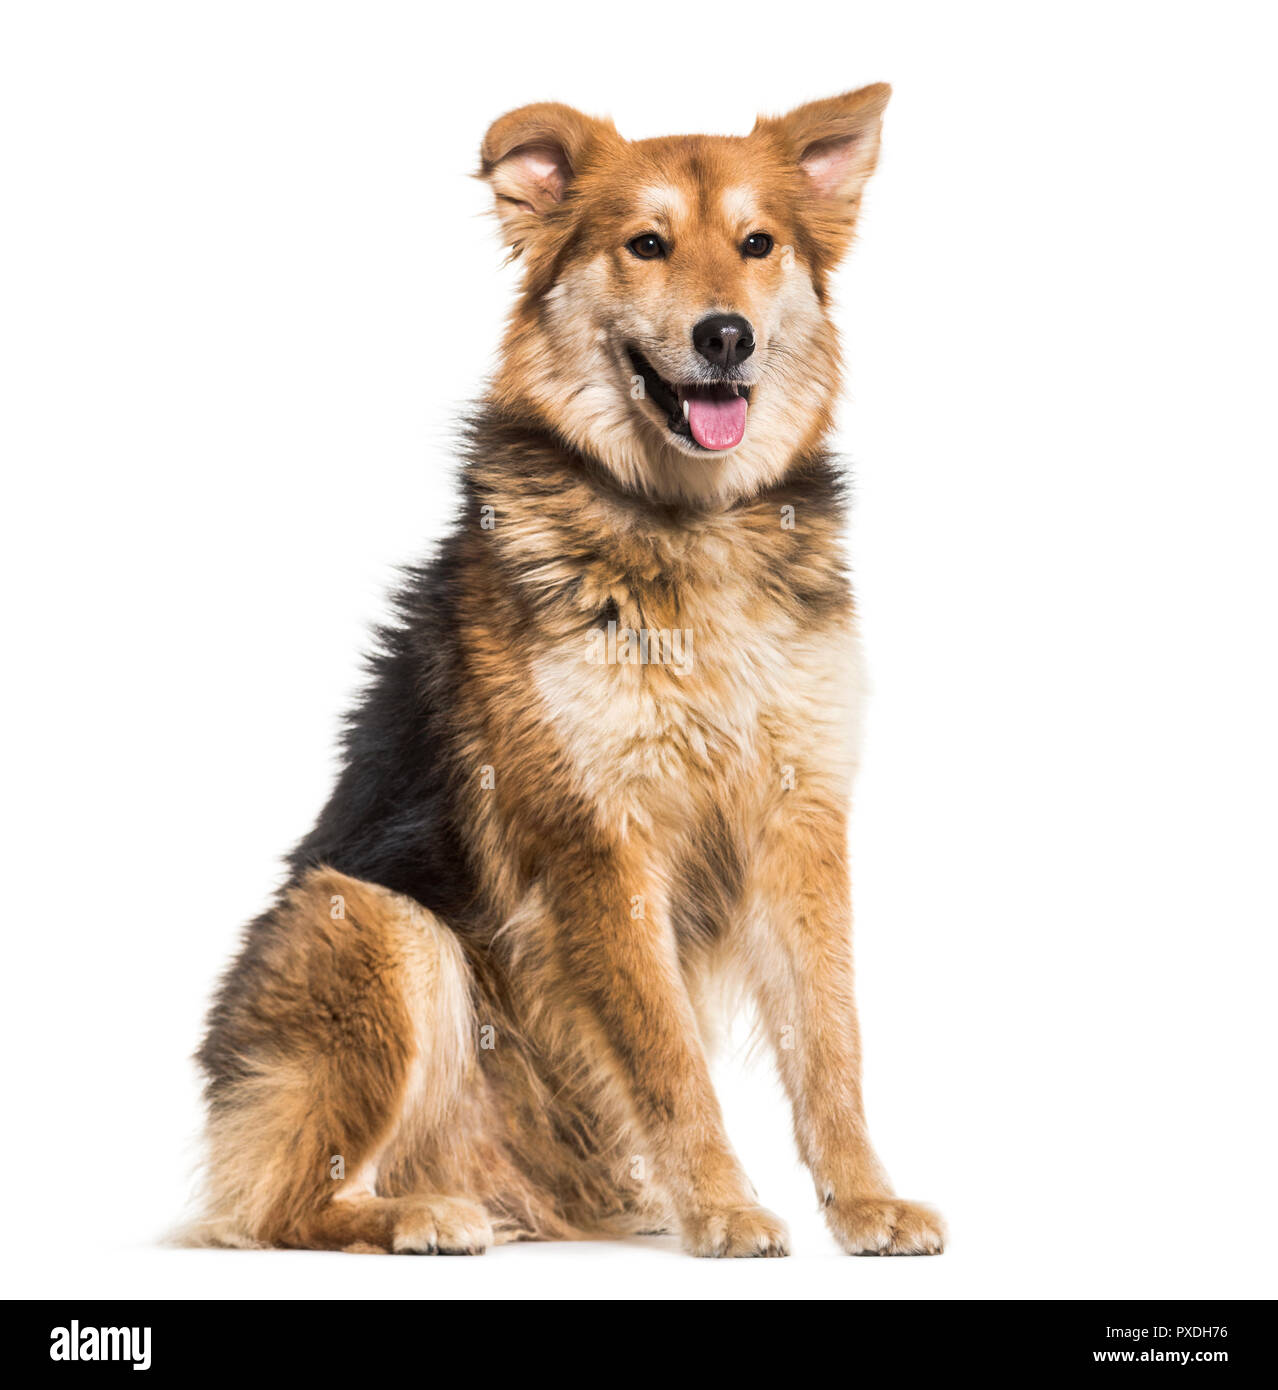 Mixed-breed dog, 8 years old, sitting against white background Stock Photo